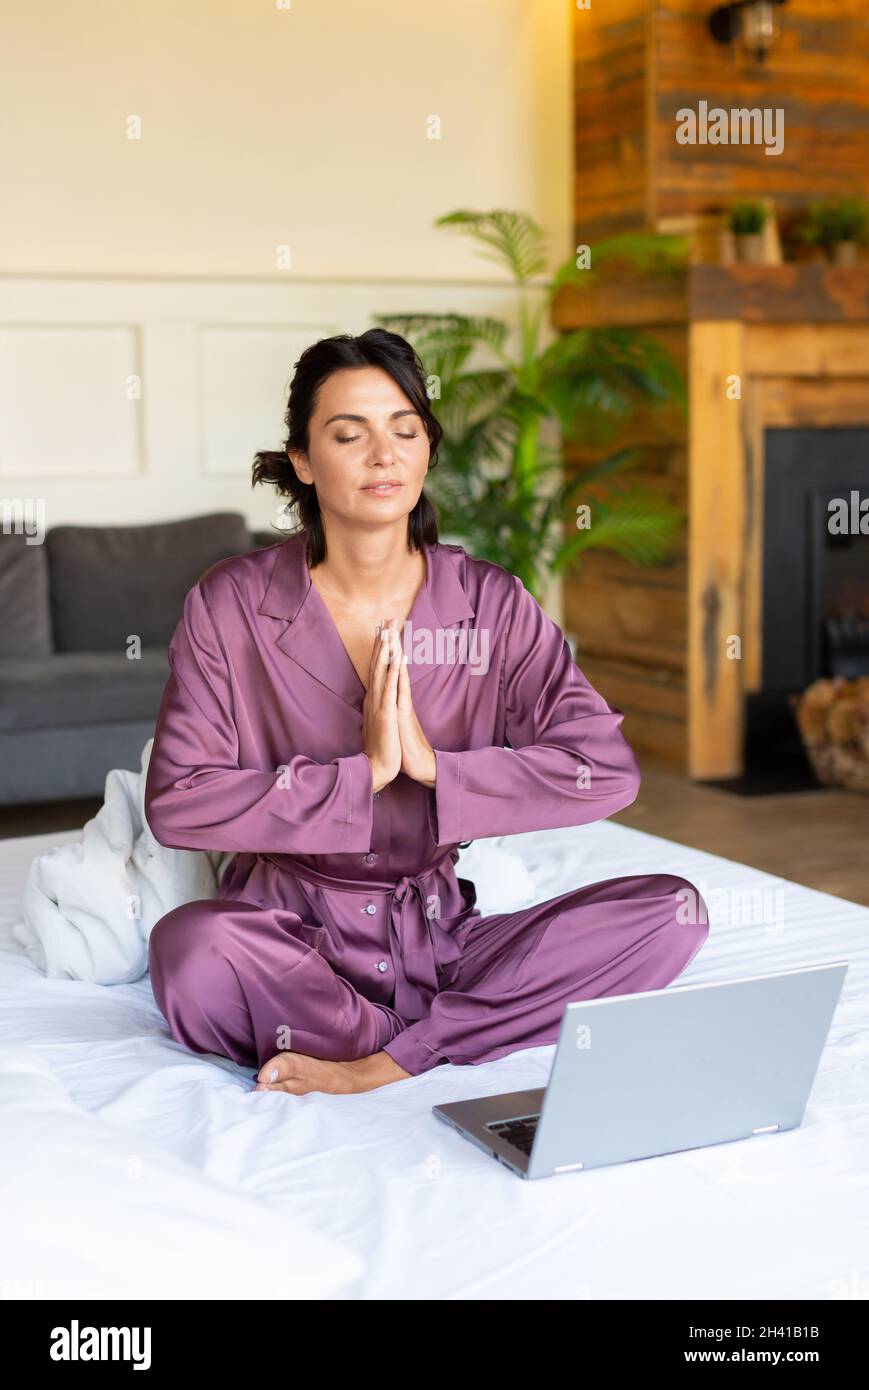 Concept of restoring strength and mental energy through yoga practice - middle aged woman meditating in bed in front of laptop monitor. Vertical photo Stock Photo